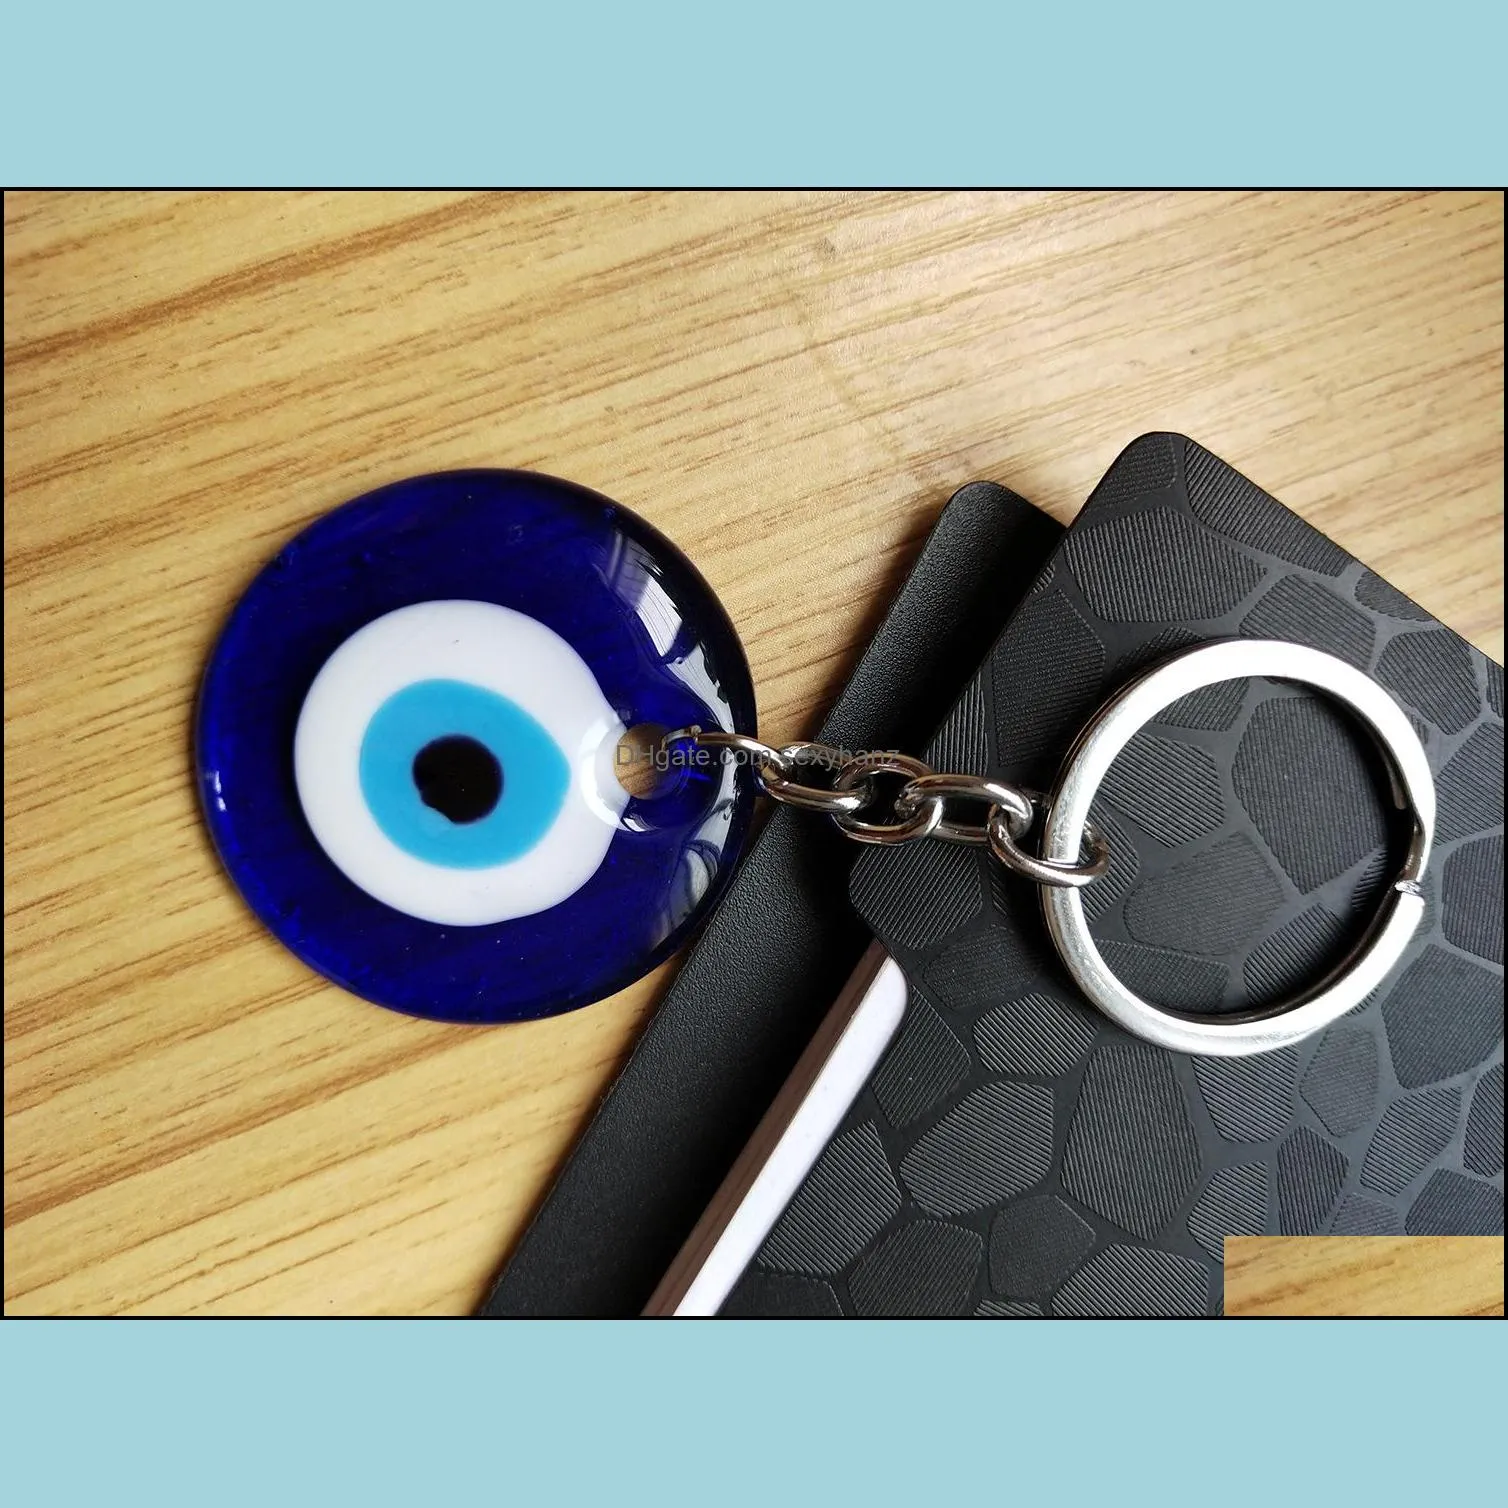 fashion lucky turkish greek blue eye keychain charm pendant gift fit jewelry diy car key chains ring holder accessories